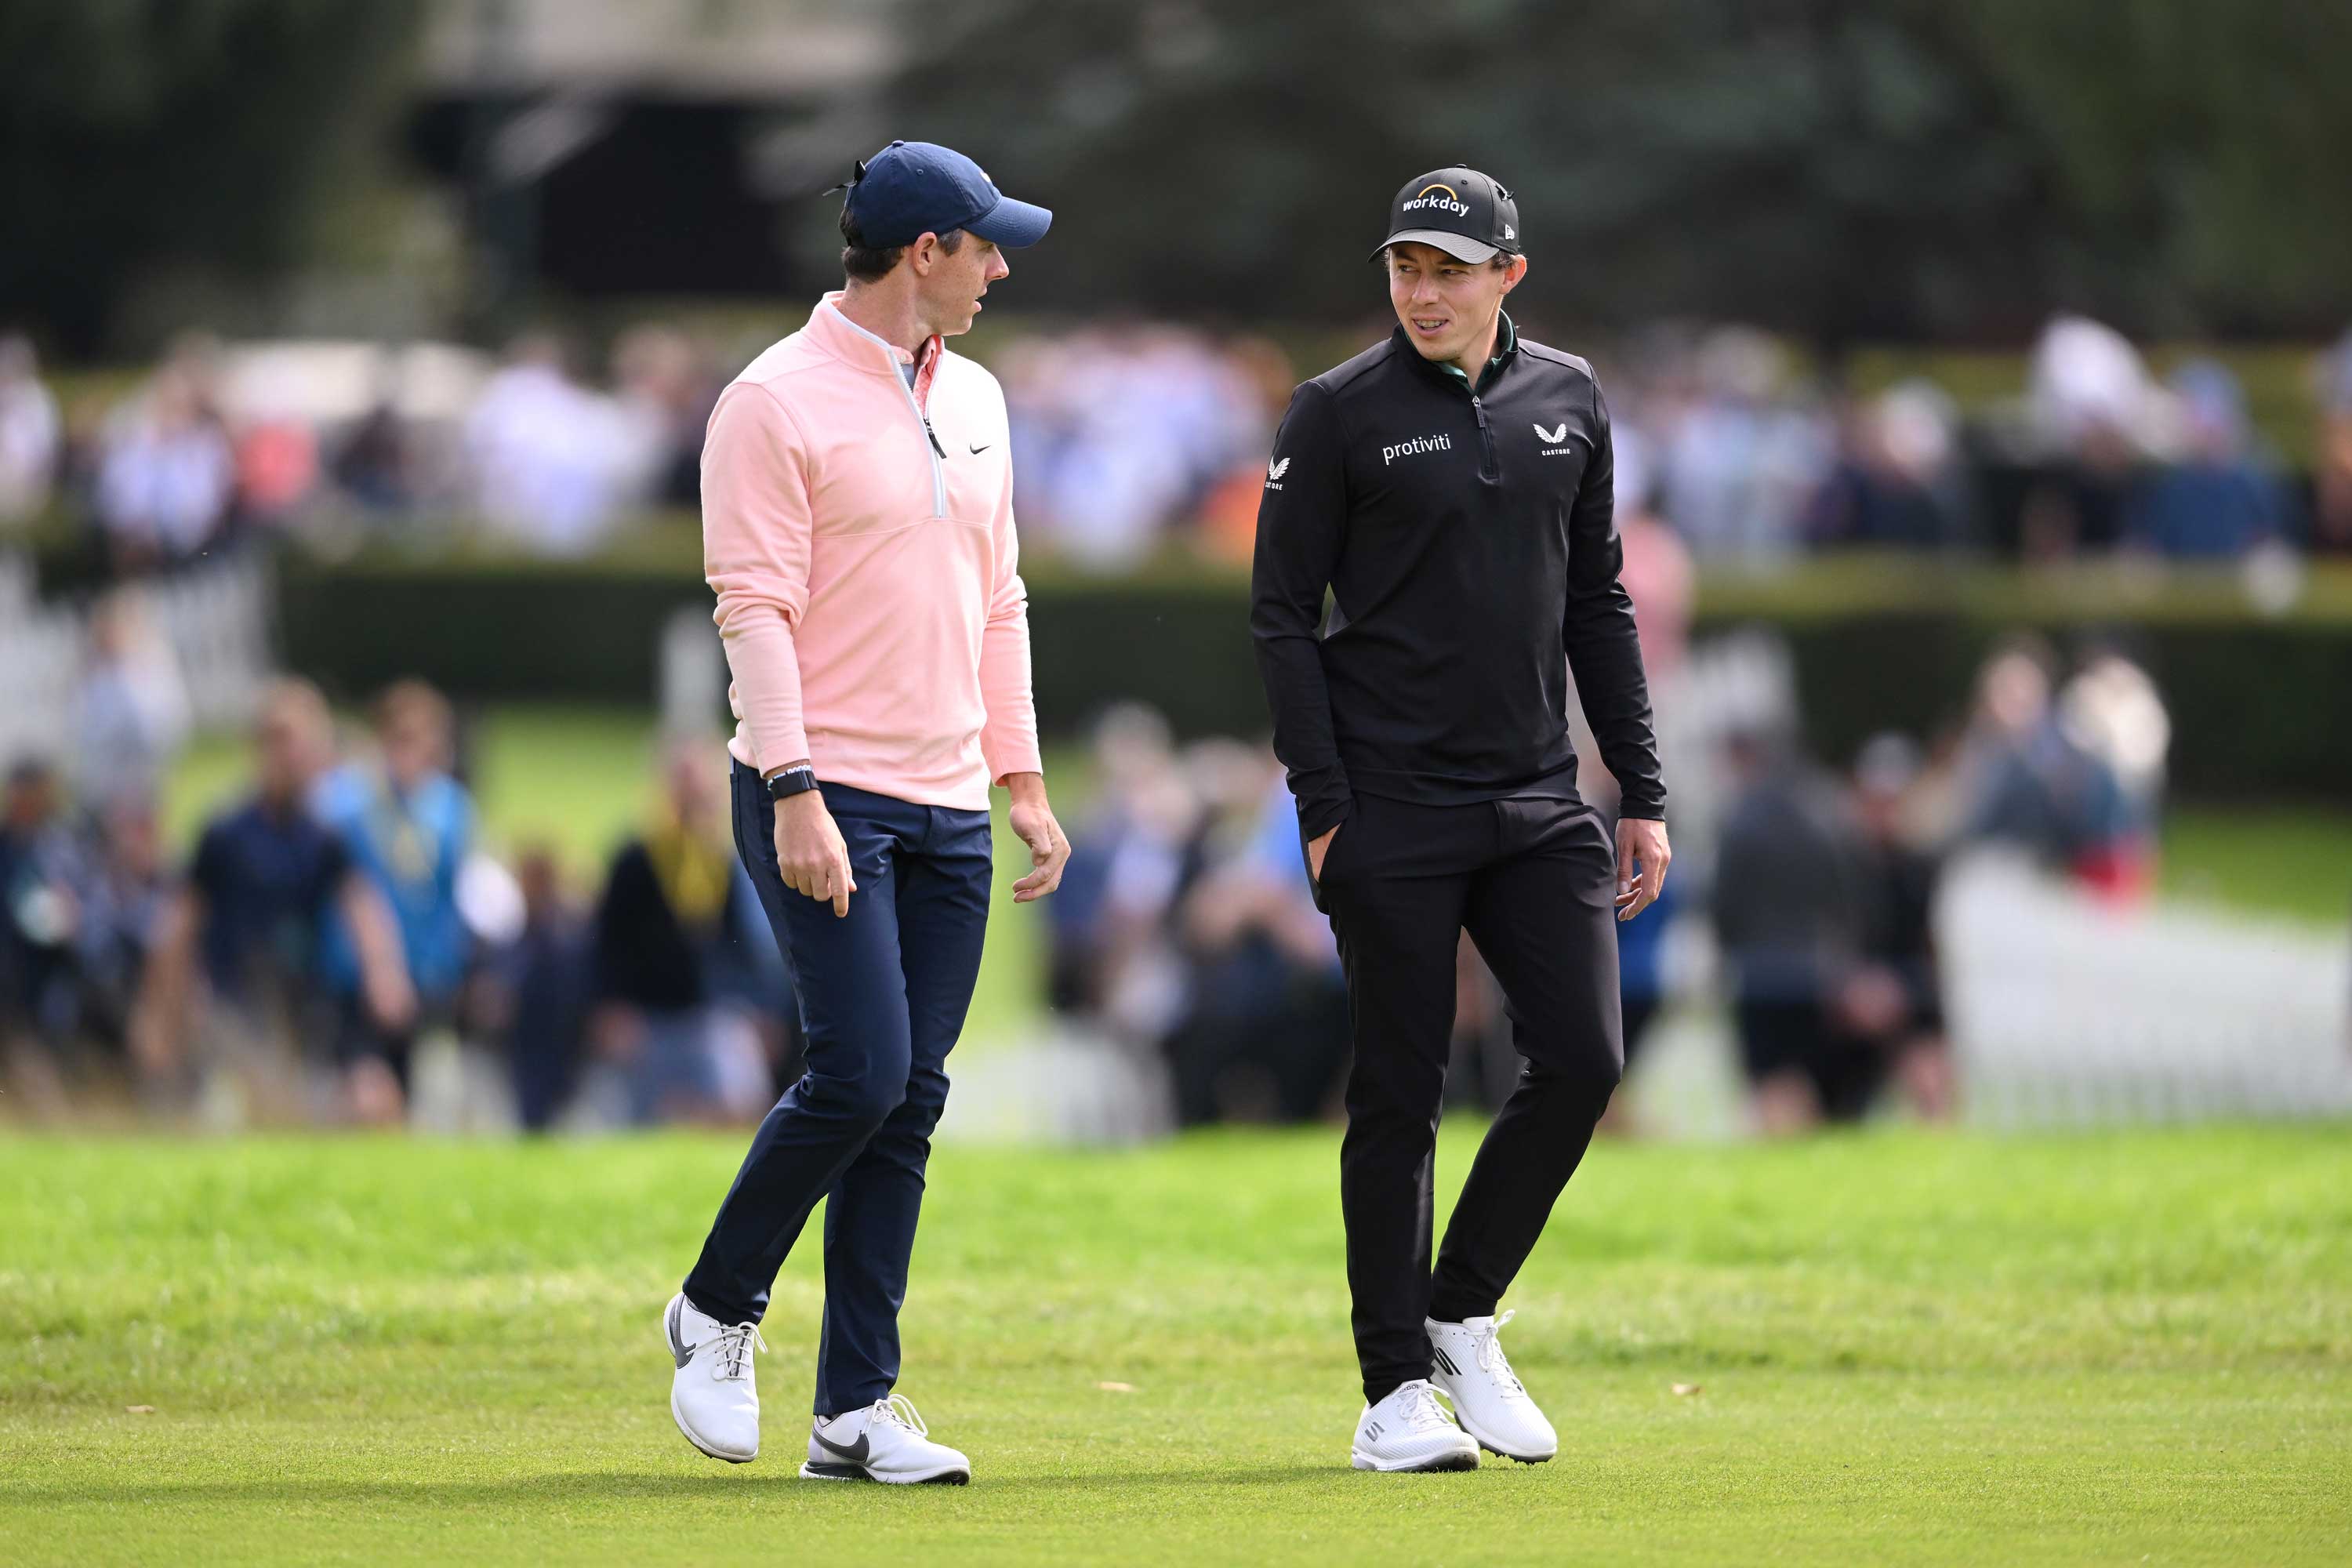 Rory McIlroy And Matthew Fitzpatrick Disagree Over LIV Golfers’ Ryder Cup Status